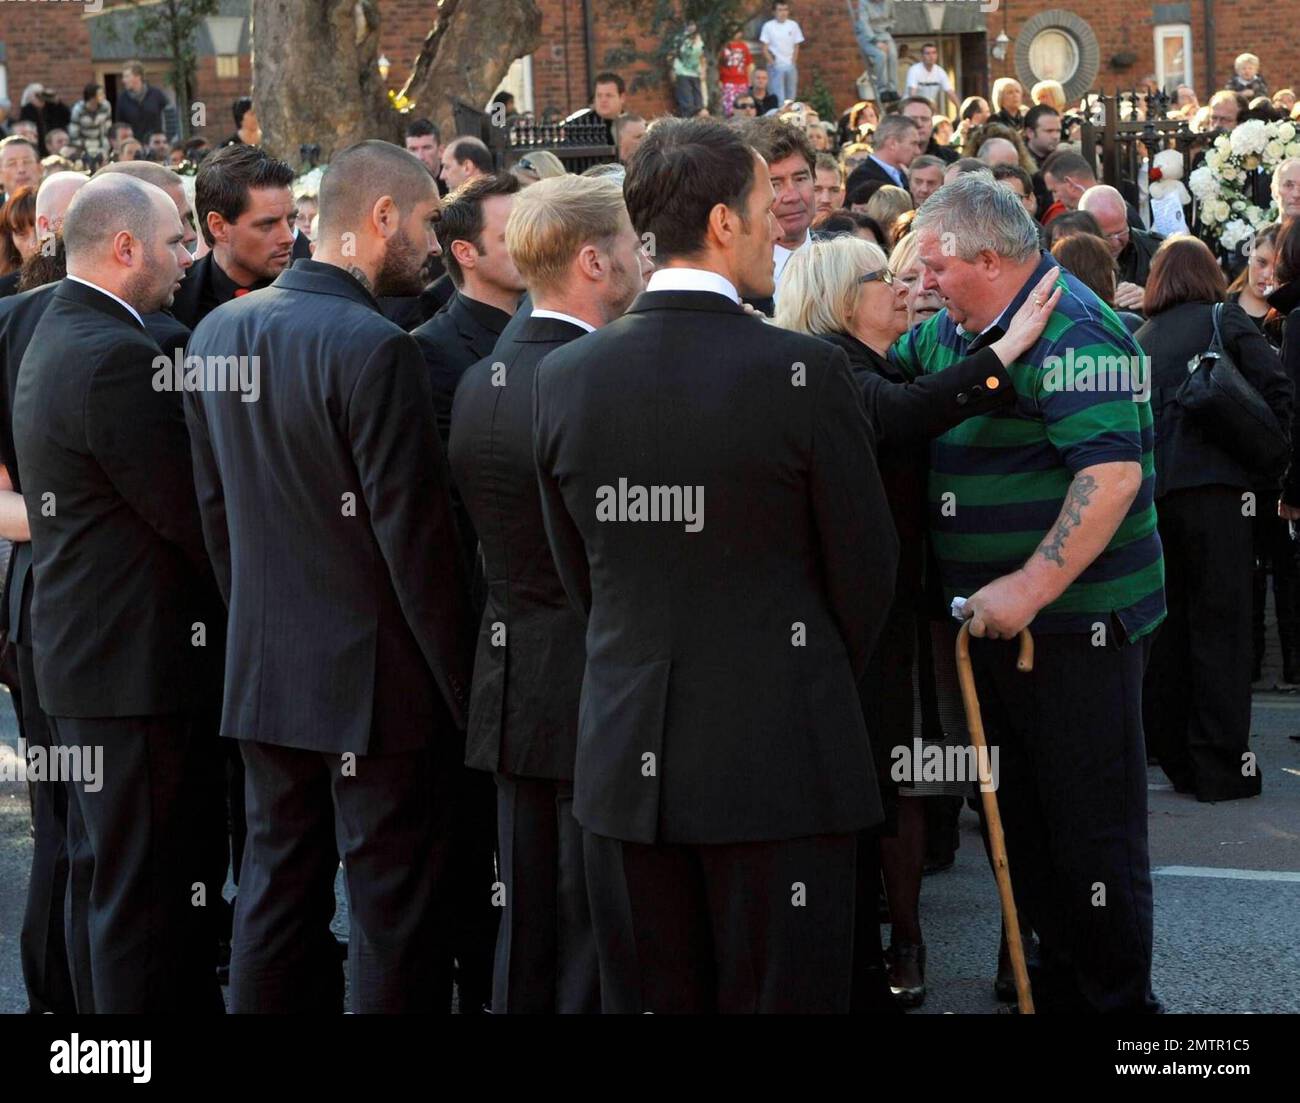 Stephen Gately's mother Margaret is comforted by friends and family as paul bearers Ronan Keating and Boyzone members Mikey Graham, Shane Lynch and Keith Duffy look on after Gately's funeral at St. Laurence O'Toole's Church. A founding member of Ireland's first boy band, Boyzone, Stephen Gately was found dead at the age of 33 while on holiday in Majorca. It's reported that an autopsy revealed that Stephen died from acute pulmonary oedema, a buildup of fluid in his lungs. Gately was a champion of gay rights after coming out in 1999 and entered into a civil union with Andrew Cowles in 2006. Dubl Stock Photo